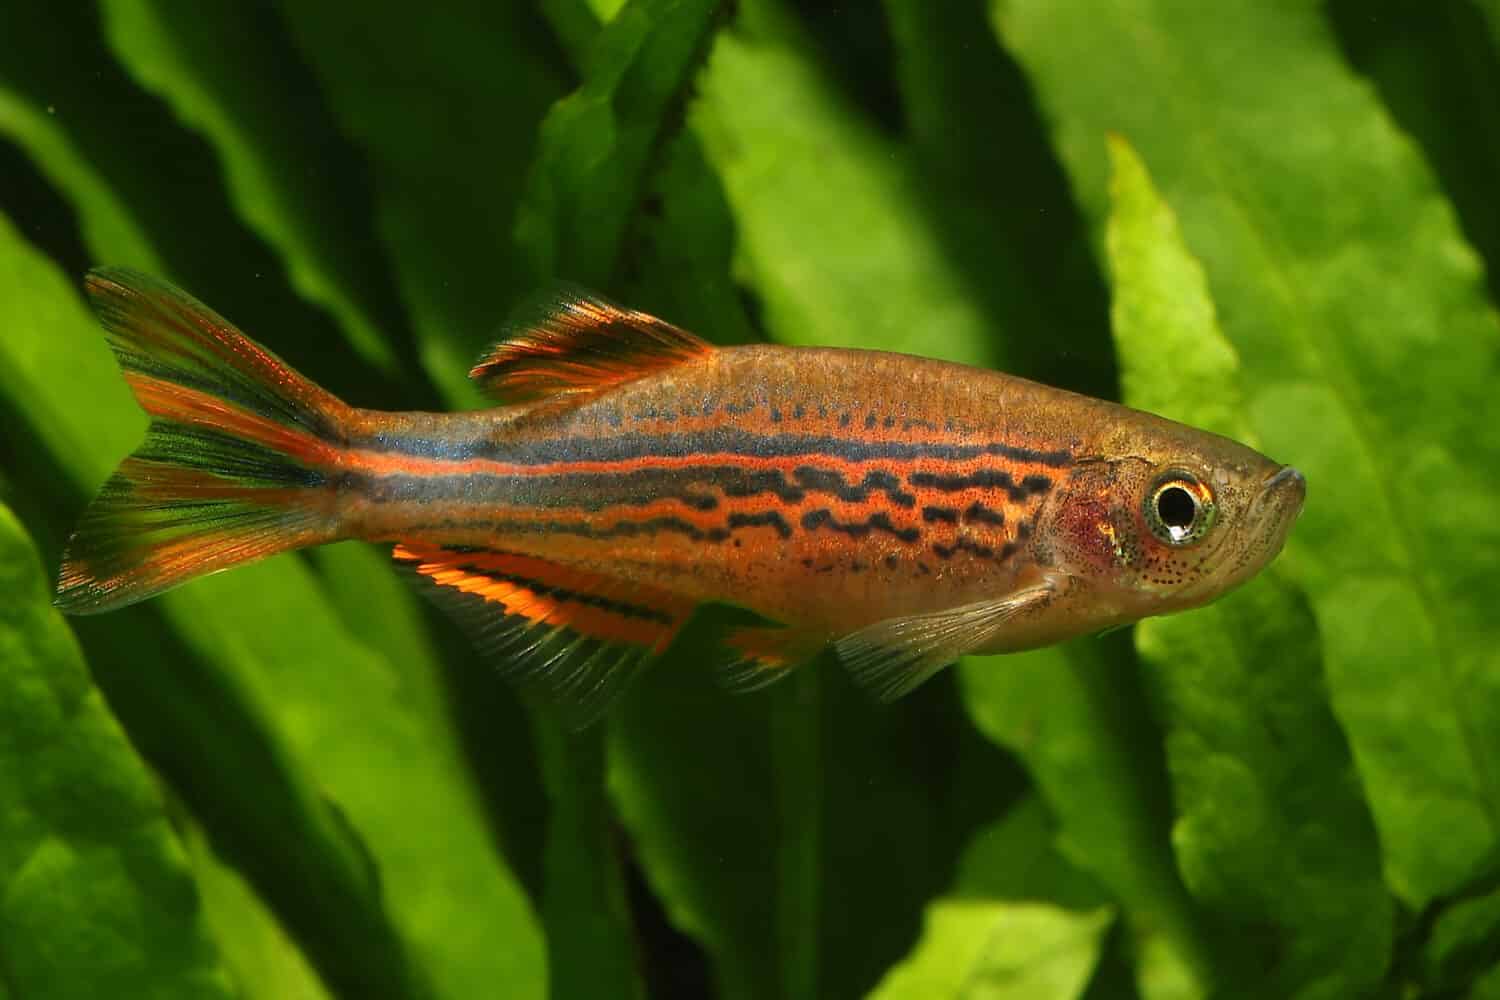 Freshwater Danio, kyathit fire ring barb from India and Sri Lanka